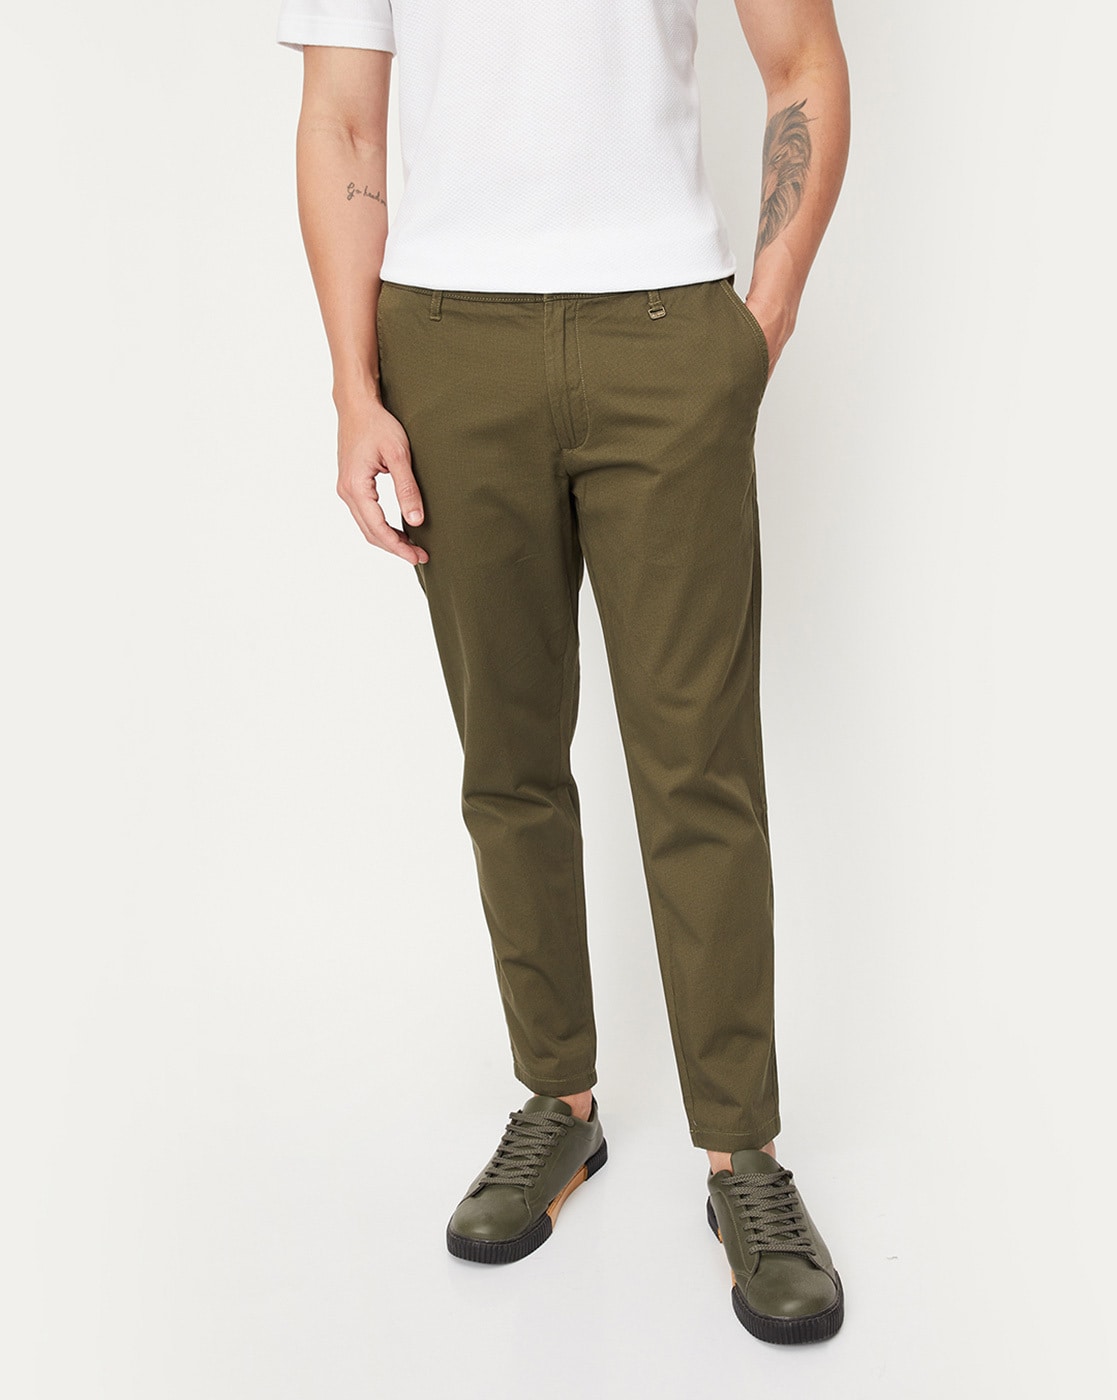 Buy Men Solid Carrot Fit Casual Trousers from Max at just INR 12990